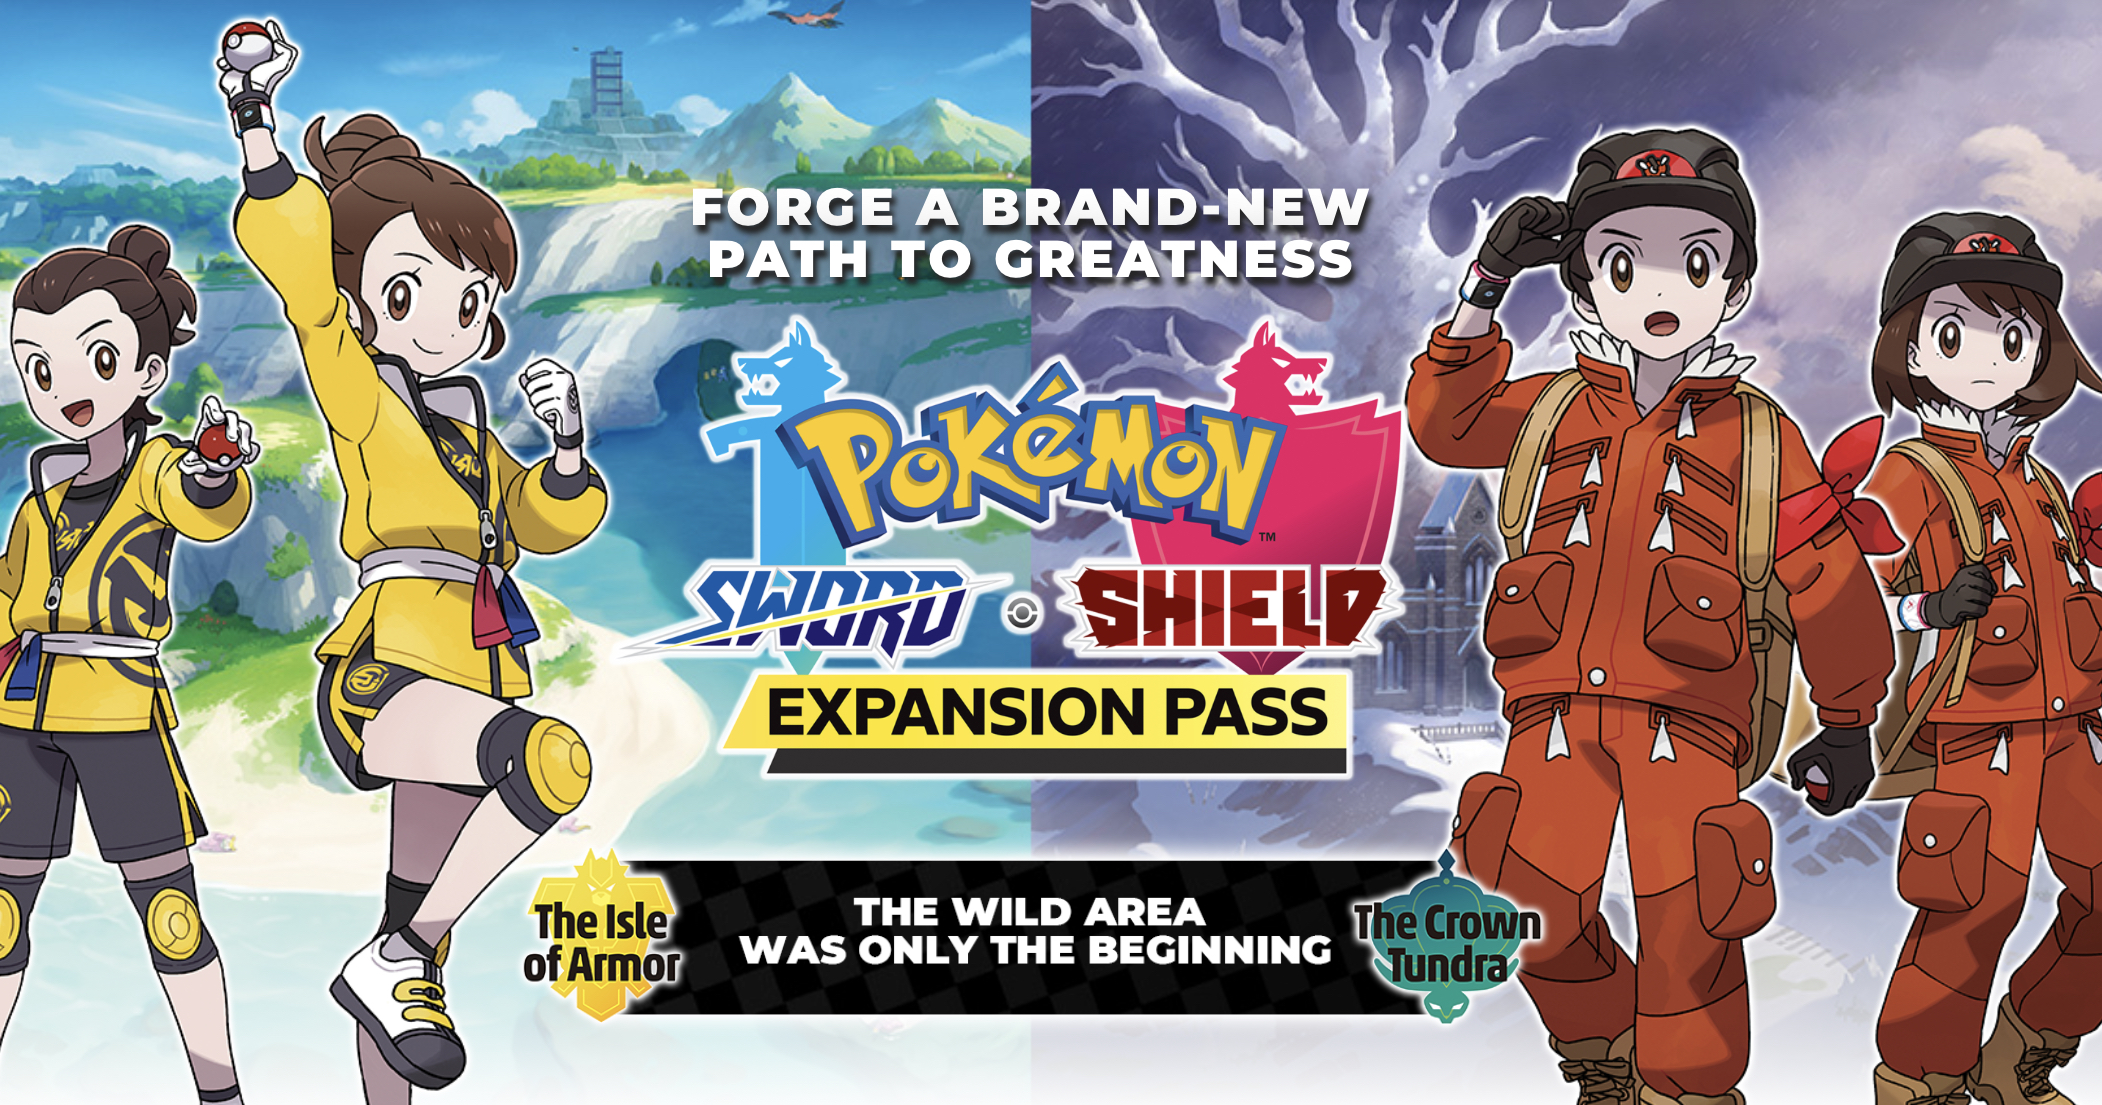 will pokemon sword and shield be on ds